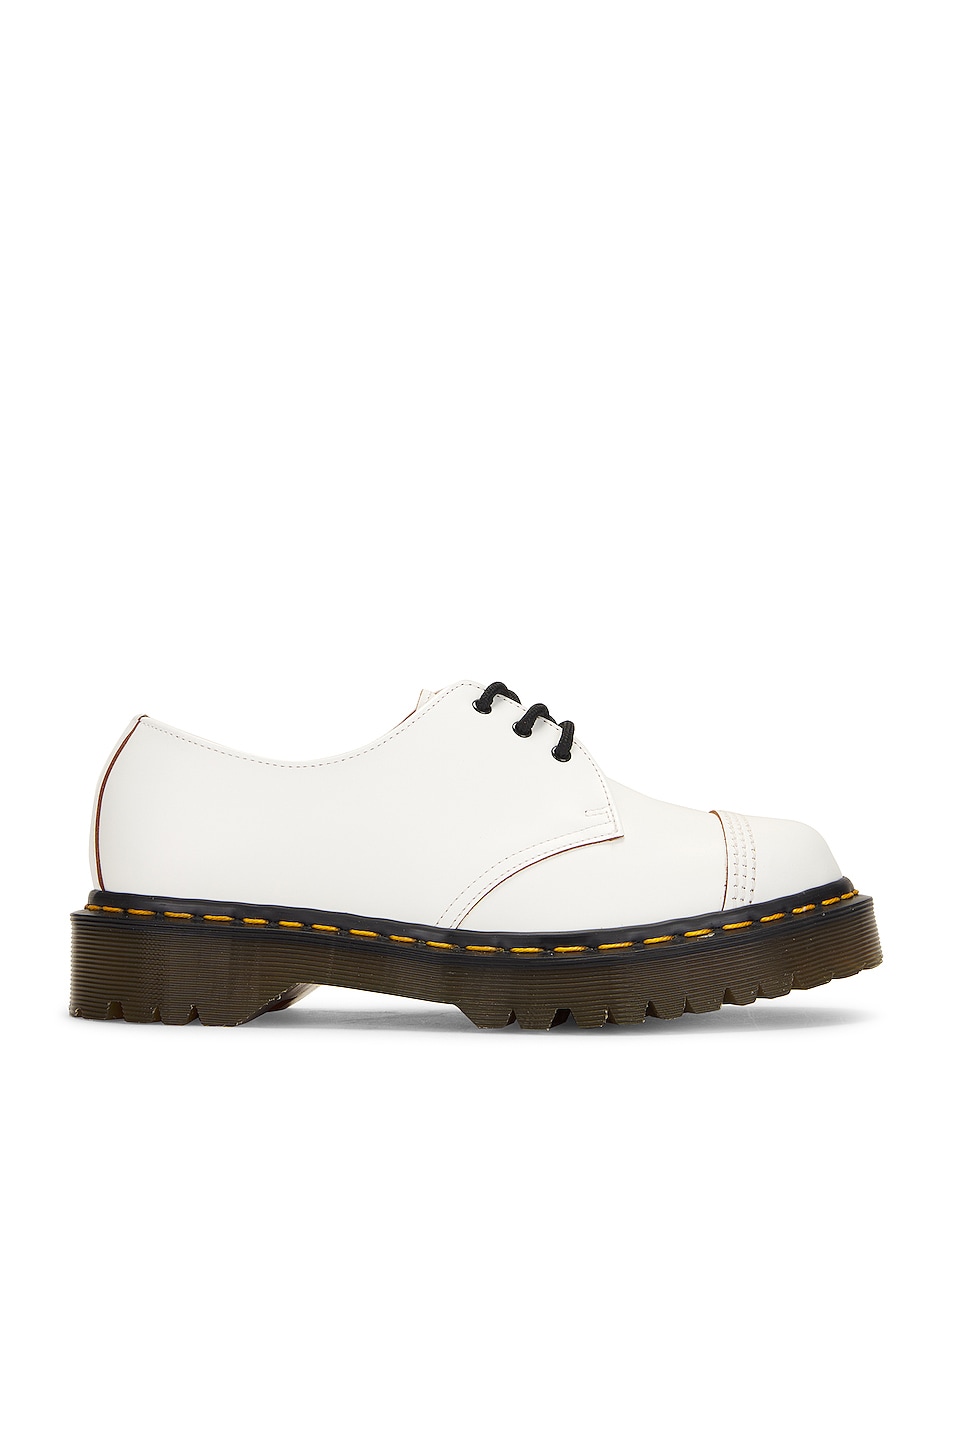 Made in England 1461 Toe Cap Bex in White